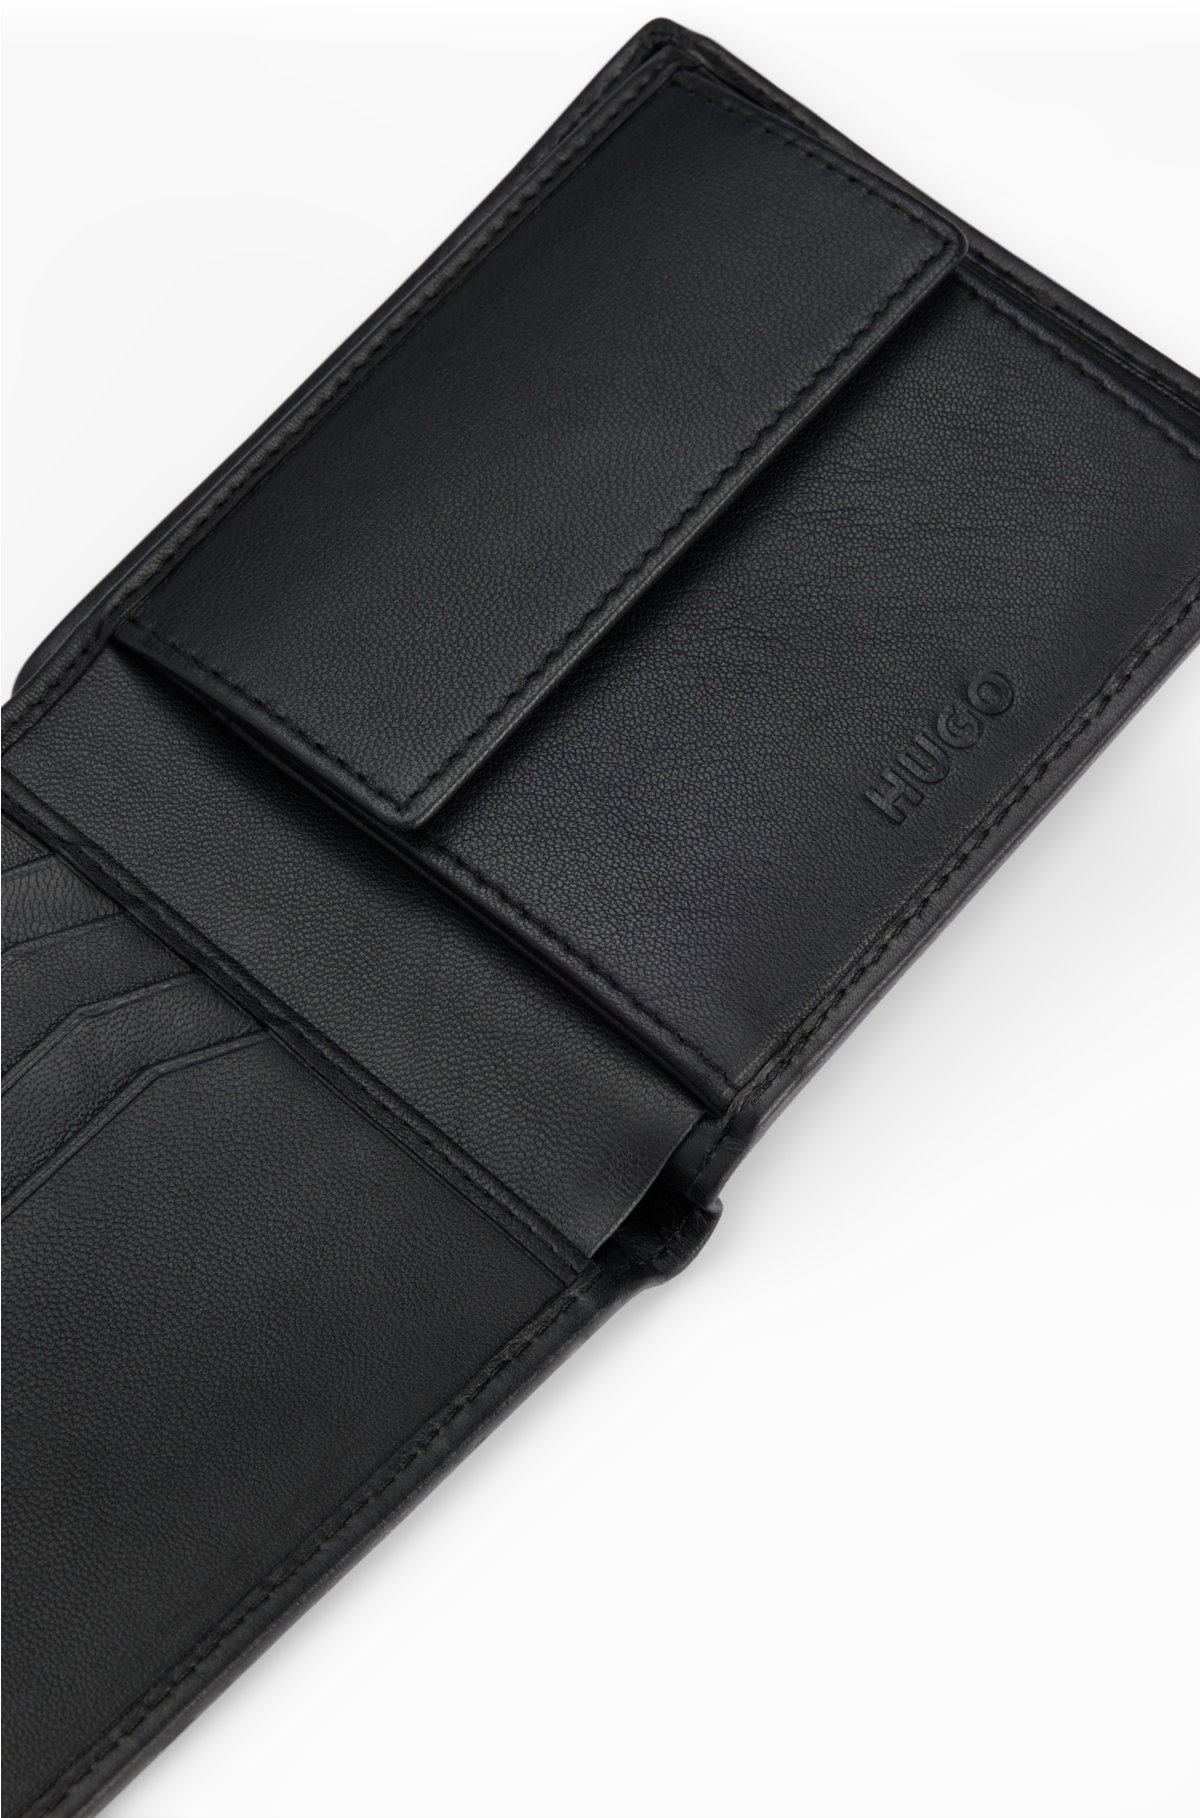 Nappa-leather wallet with stacked logo and coin pocket, Black